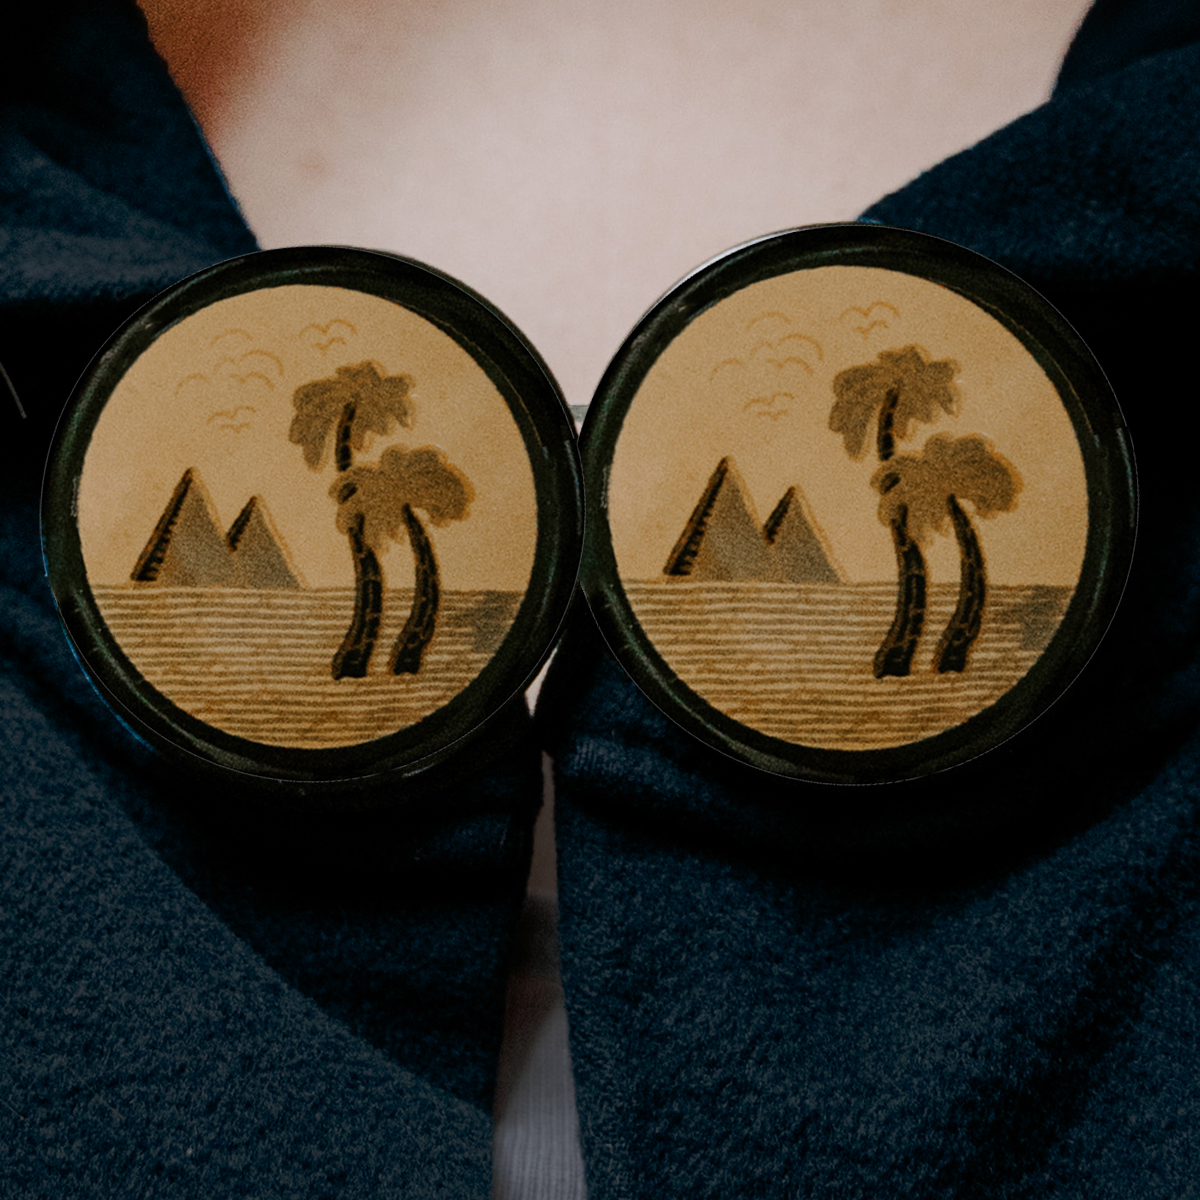 large 1920s celluloid buttons with palm trees and pyramid